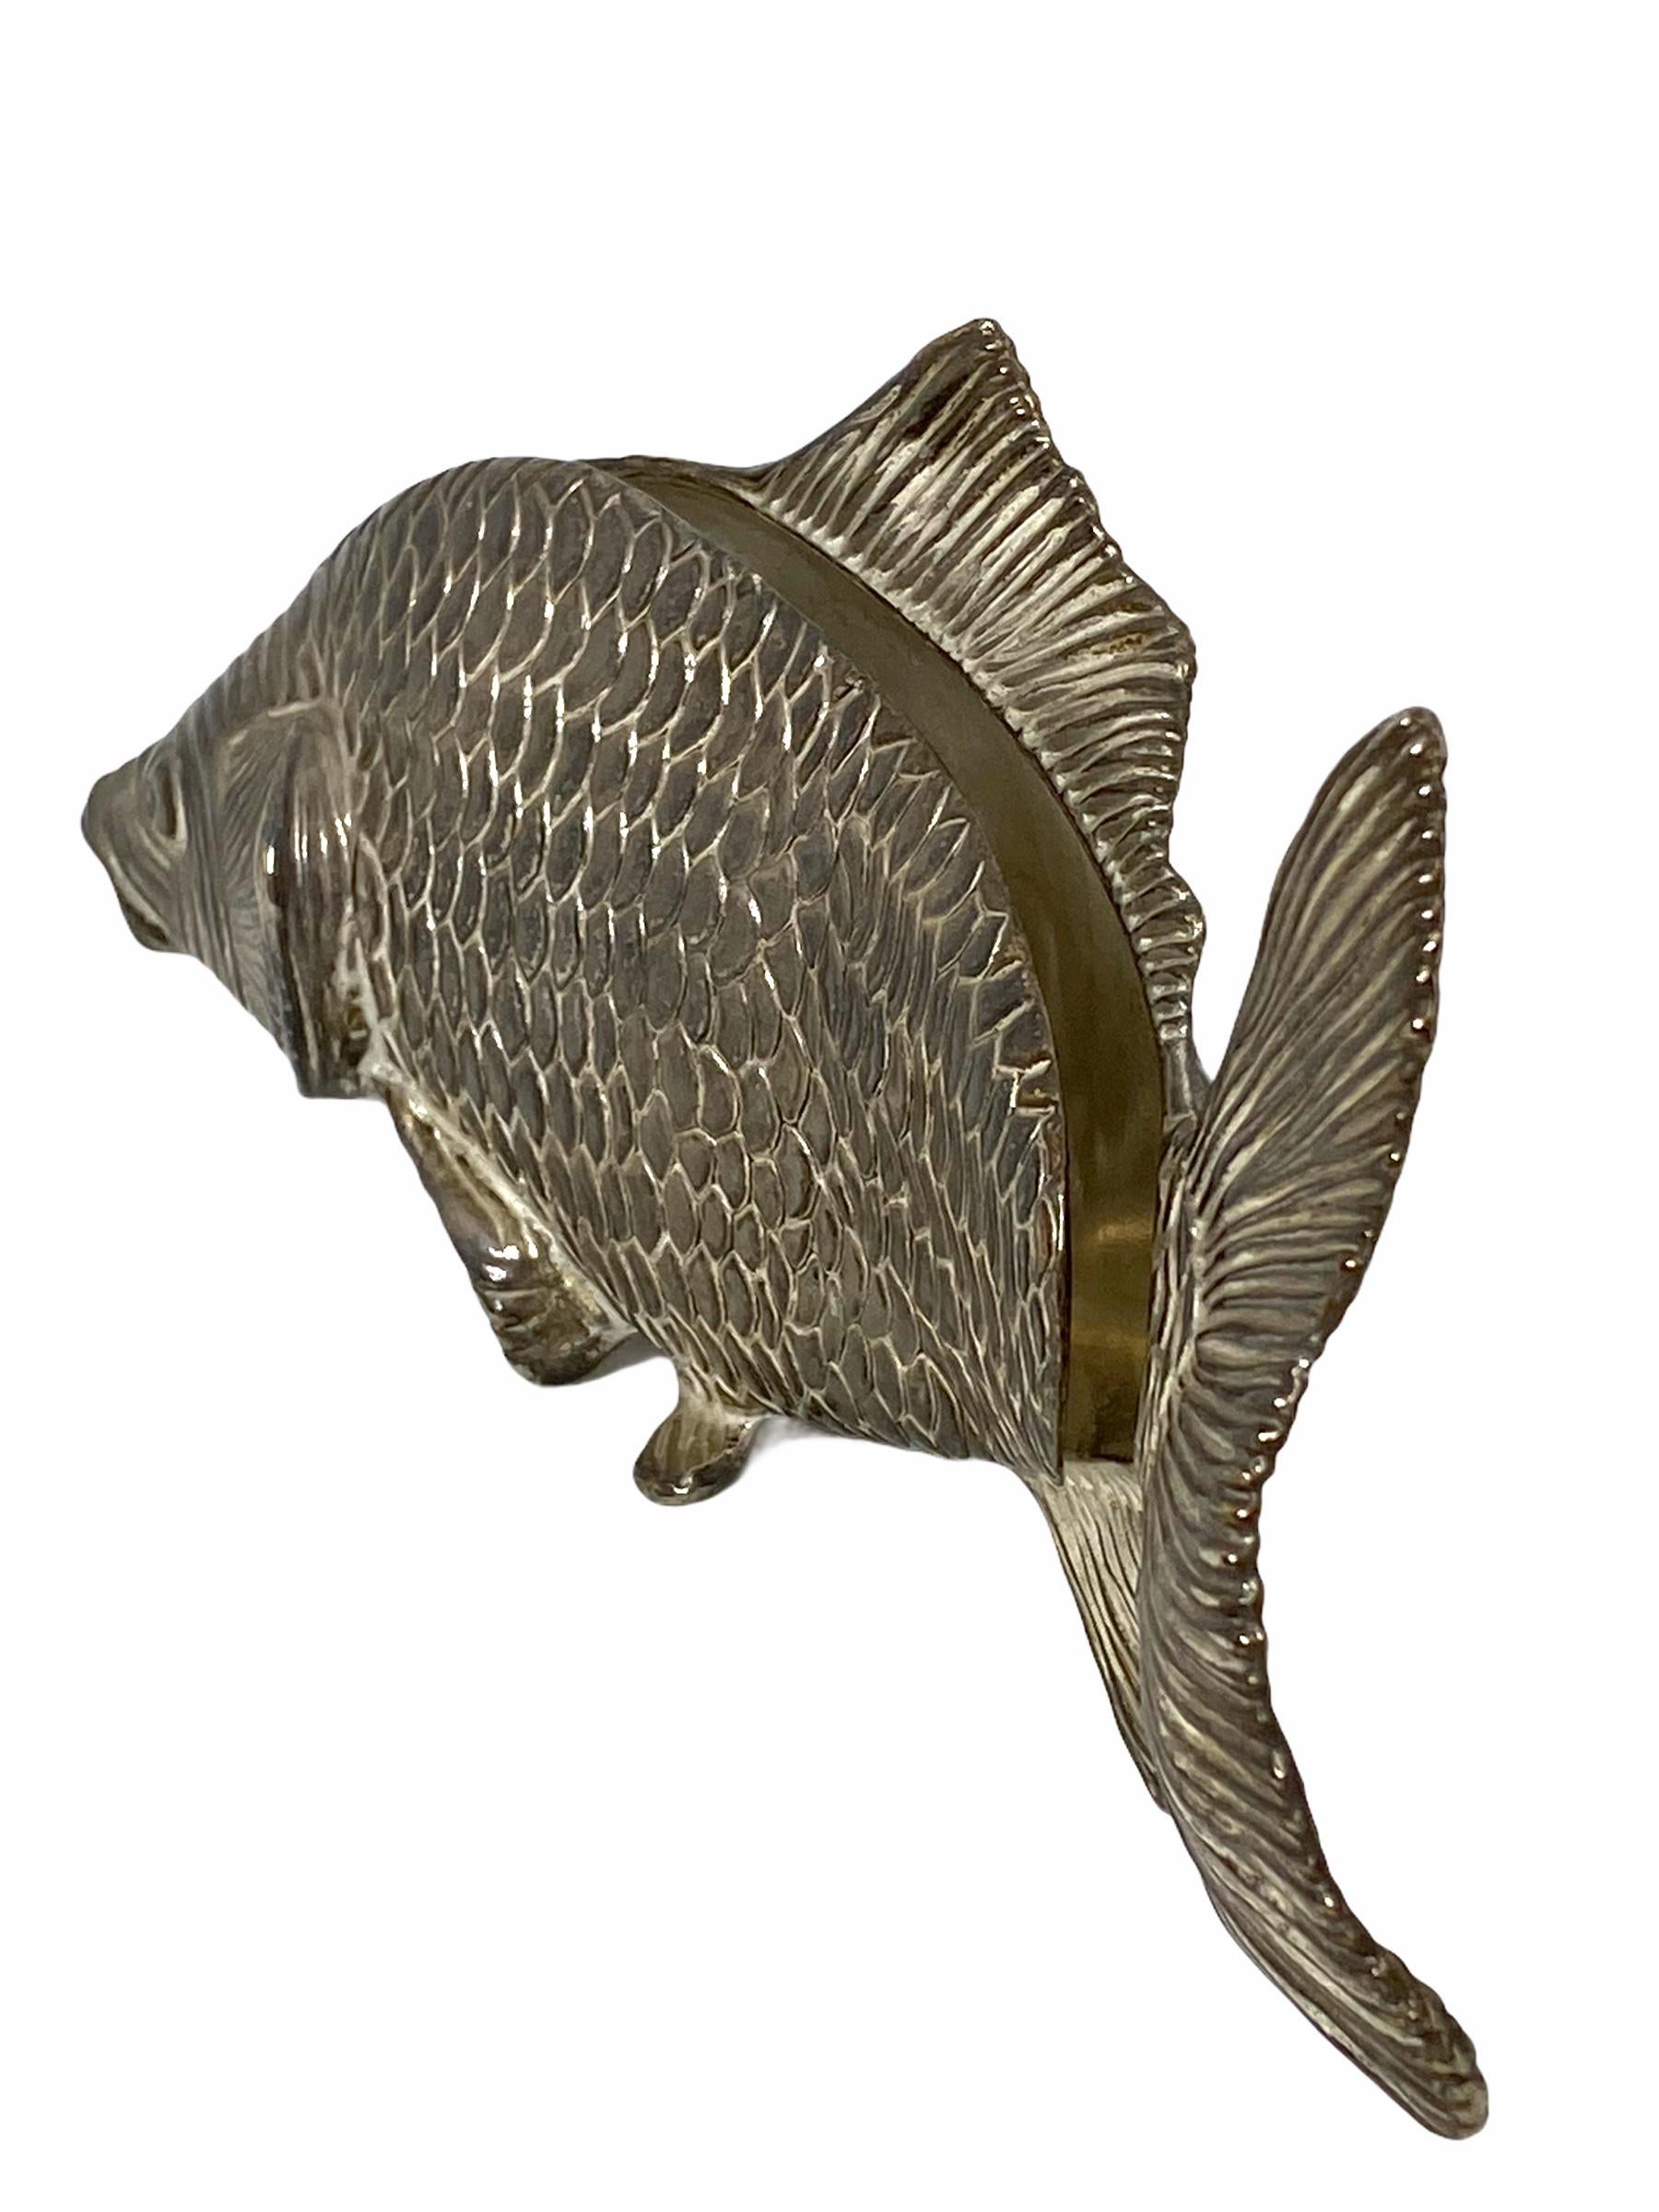 Silvered Silver Plated Koi Carp Fish Napkin Holder Stand, Germany, 1960s For Sale